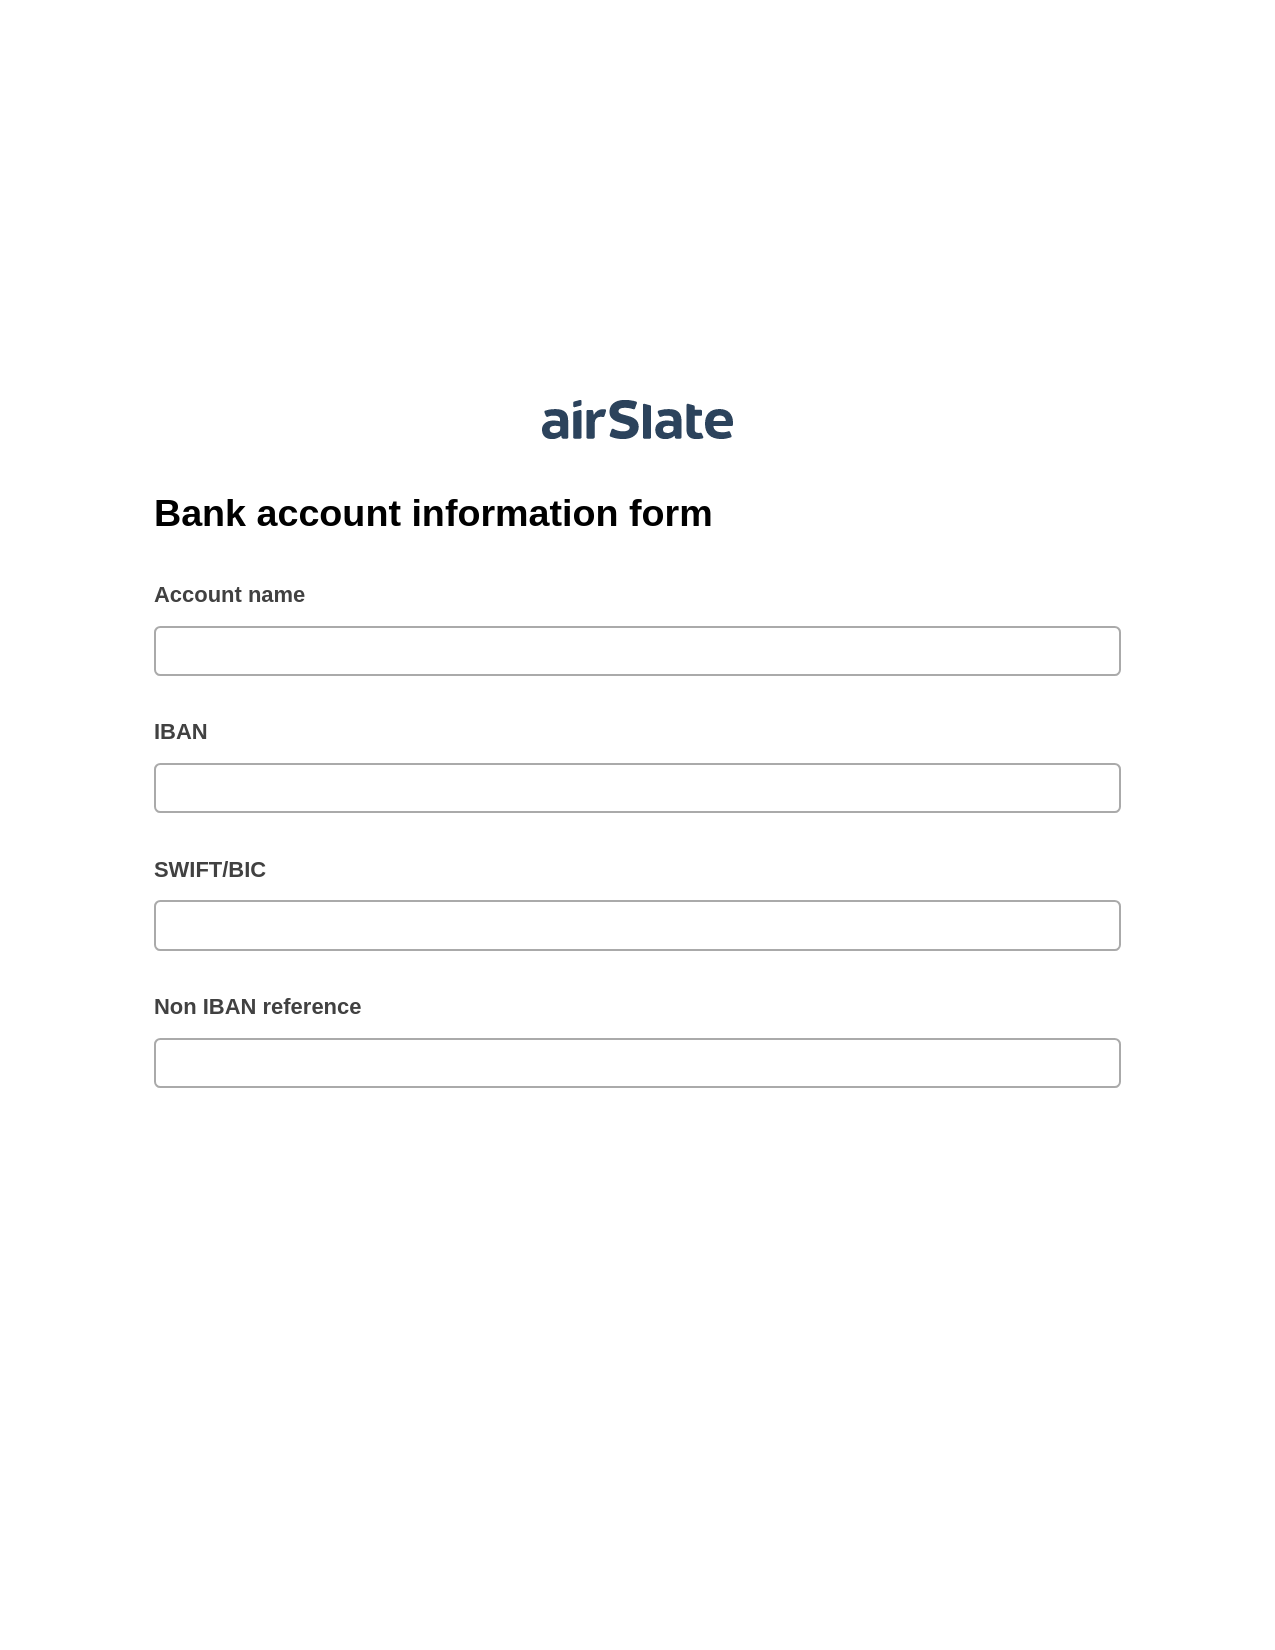 Multirole Bank account information form Pre-fill Slate from MS Dynamics 365 Records Bot, Create Slate from another Flow Bot, Post-finish Document Bot